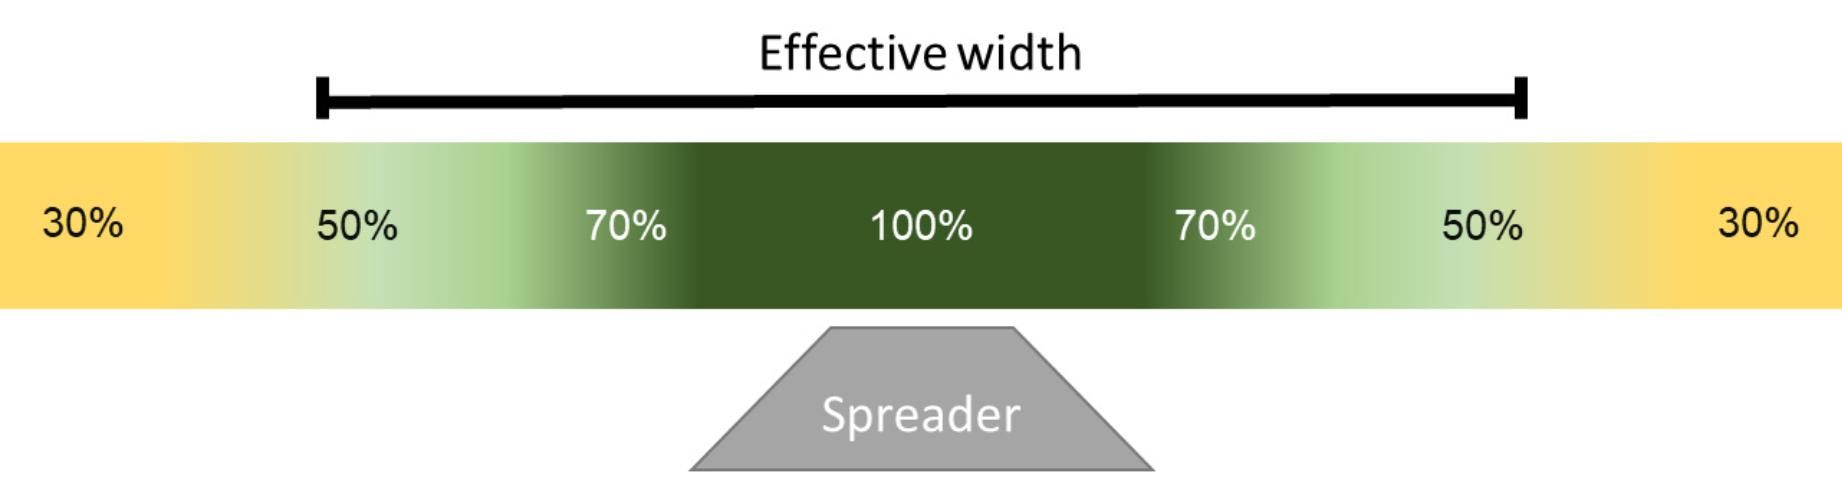 Figure 2. Distribution pattern and effective spreading width for broadcast spreaders. Percentages represent the fraction of target seeding rate being applied at different distances from the center of the spreader.